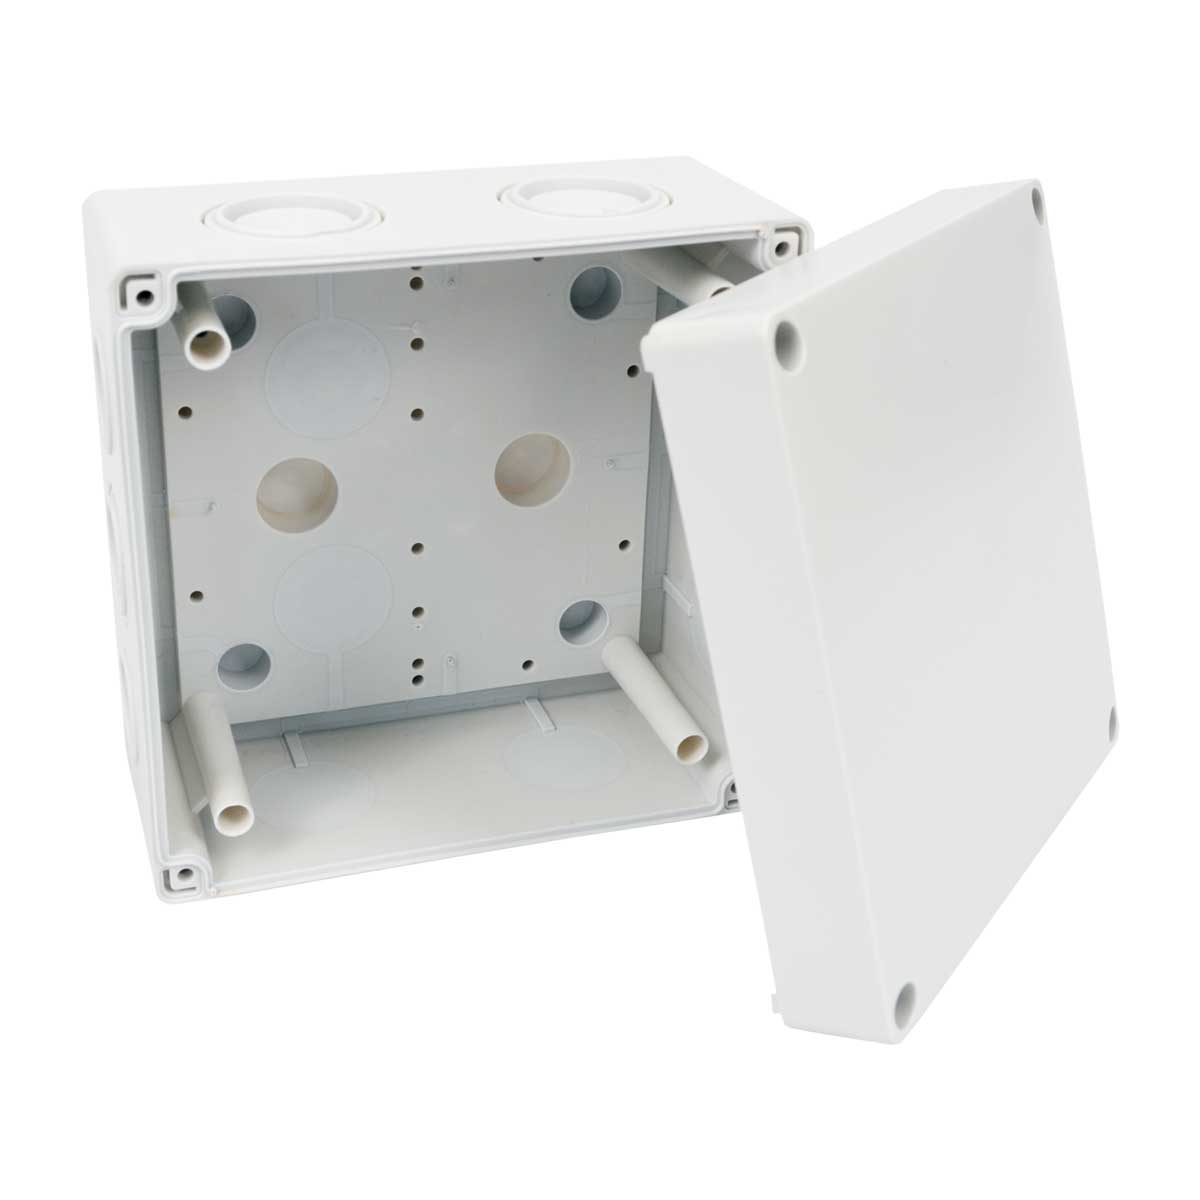 Kopp 340604504 Junction Box Profi-Pack 10x Surface-Mounted for Damp Room 75 x 75 x 35mm Grey 